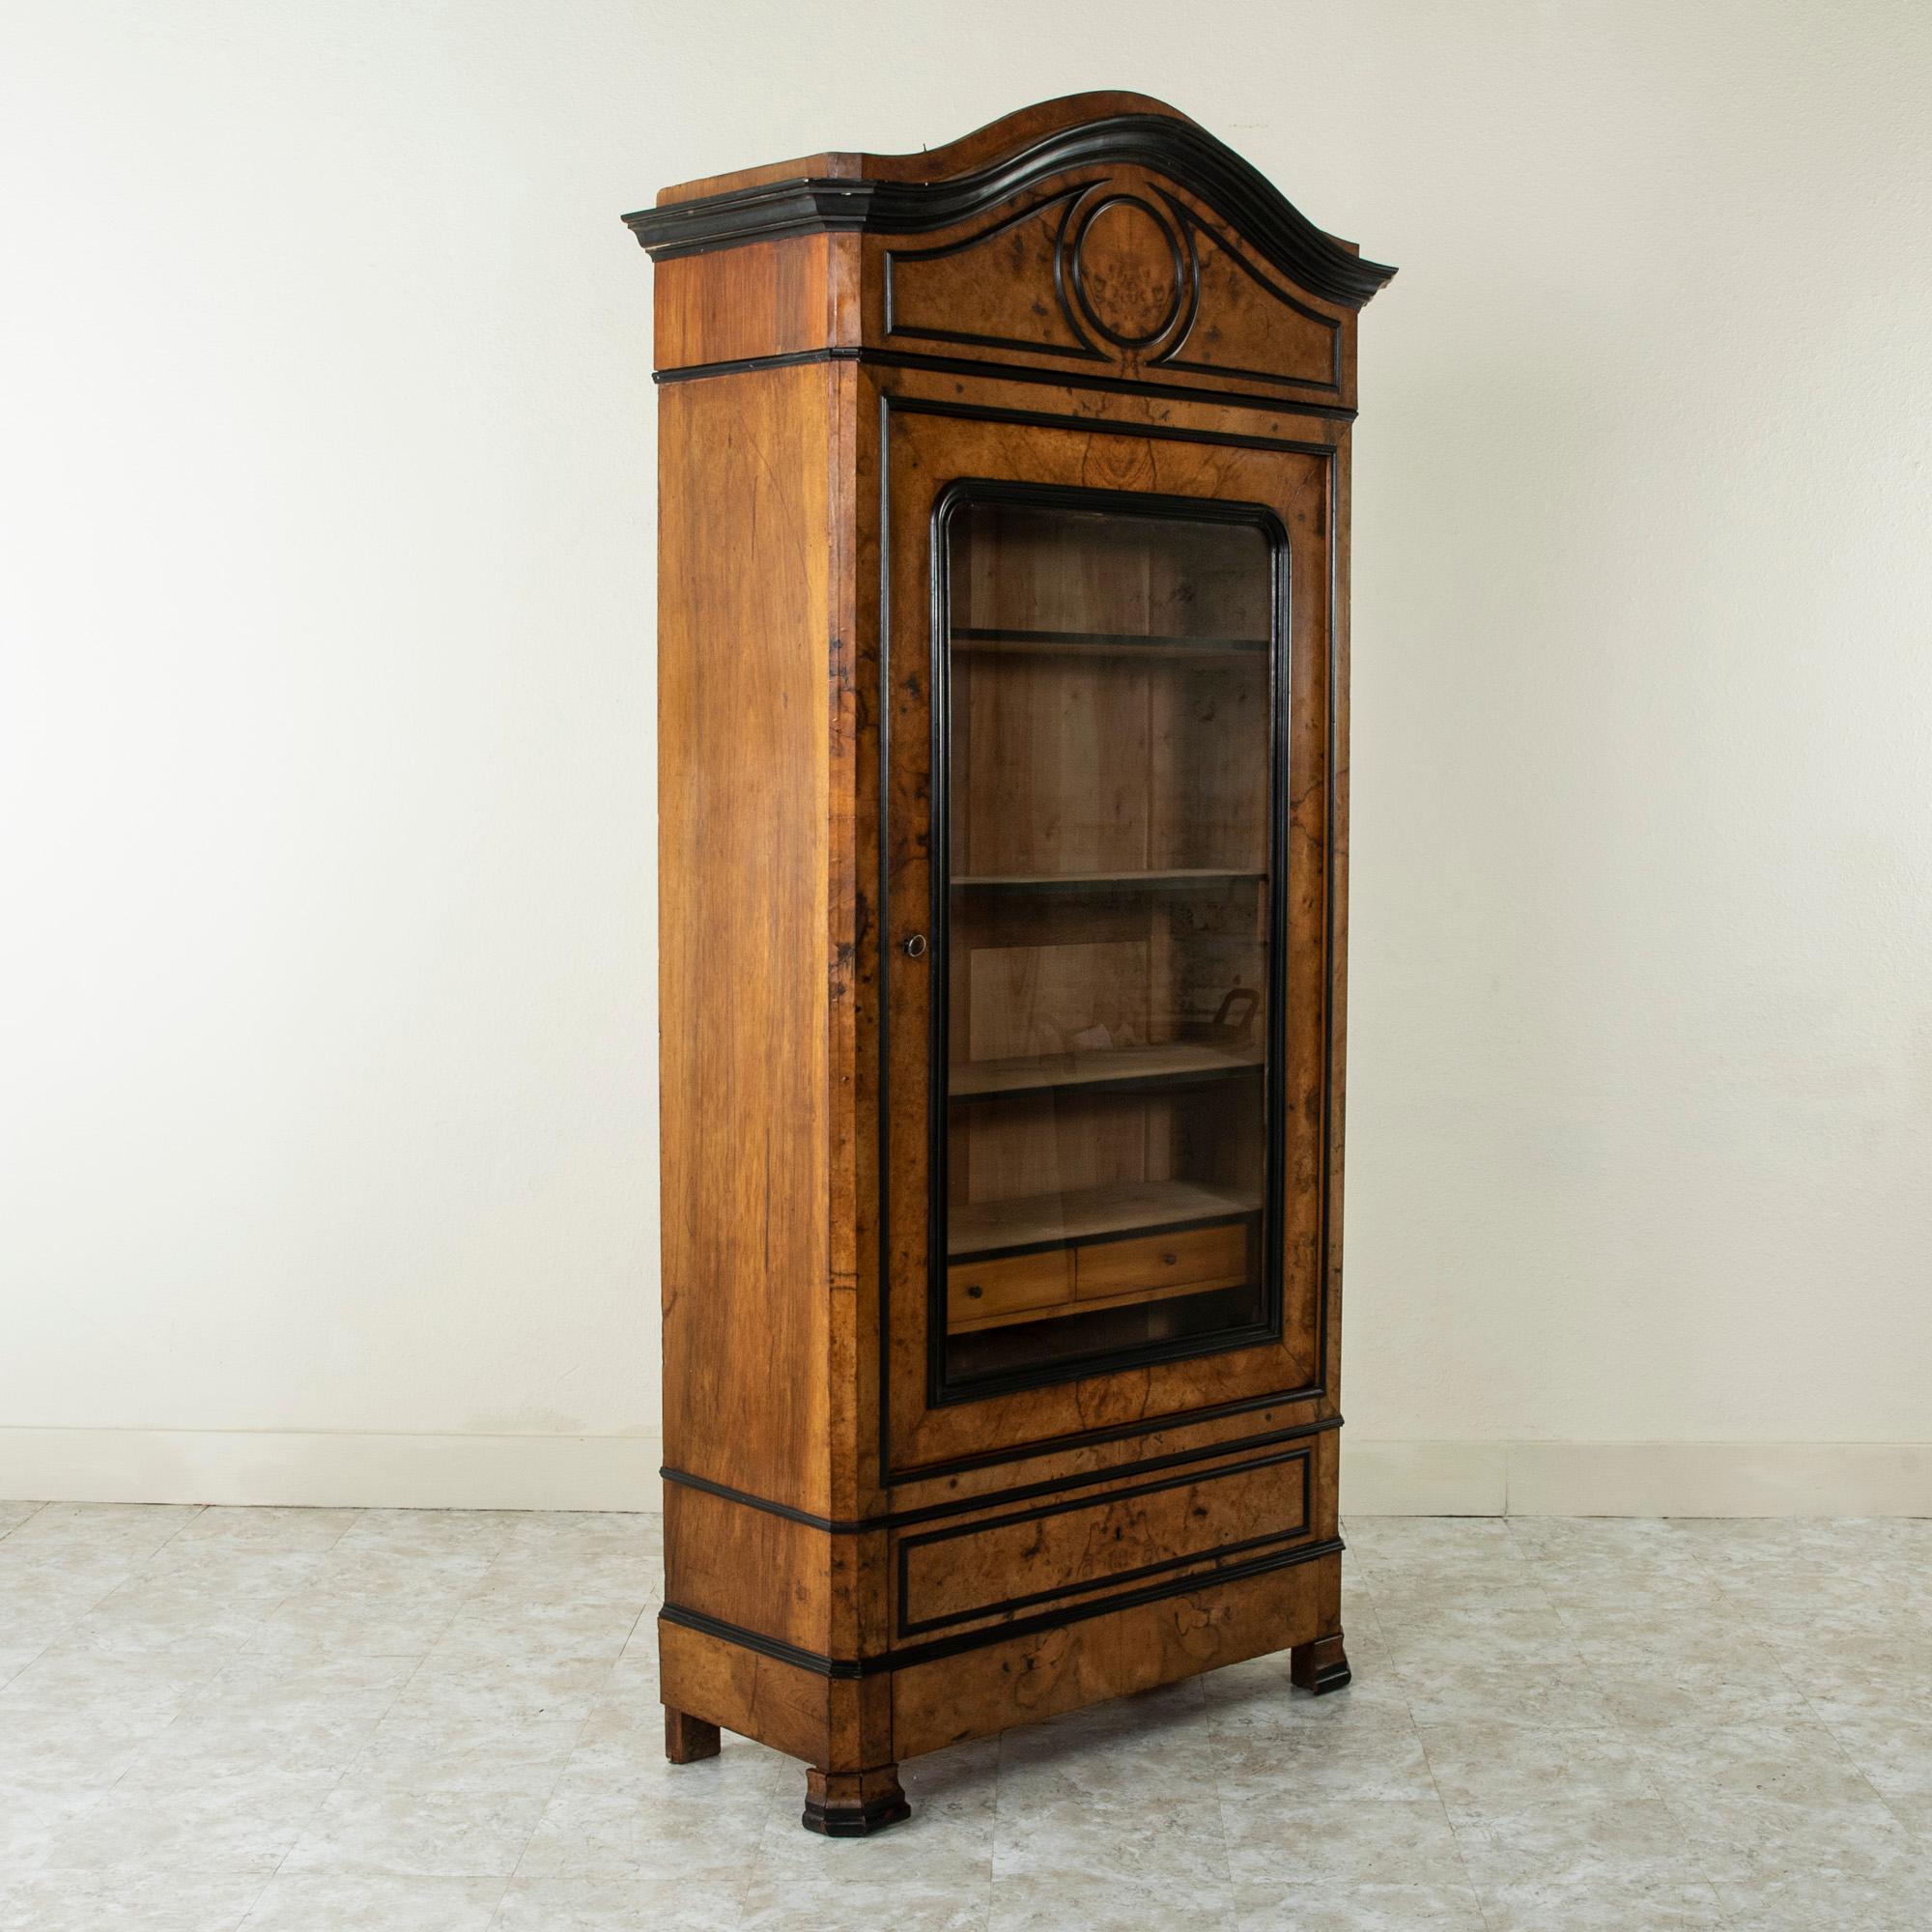 This mid-19th century French Napoleon III period vitrine or bookcase is constructed of burl walnut and features clean simple lines. Providing an elegant contrast, the piece is trimmed in ebonized pearwood. Of an unusual size with its narrow width of